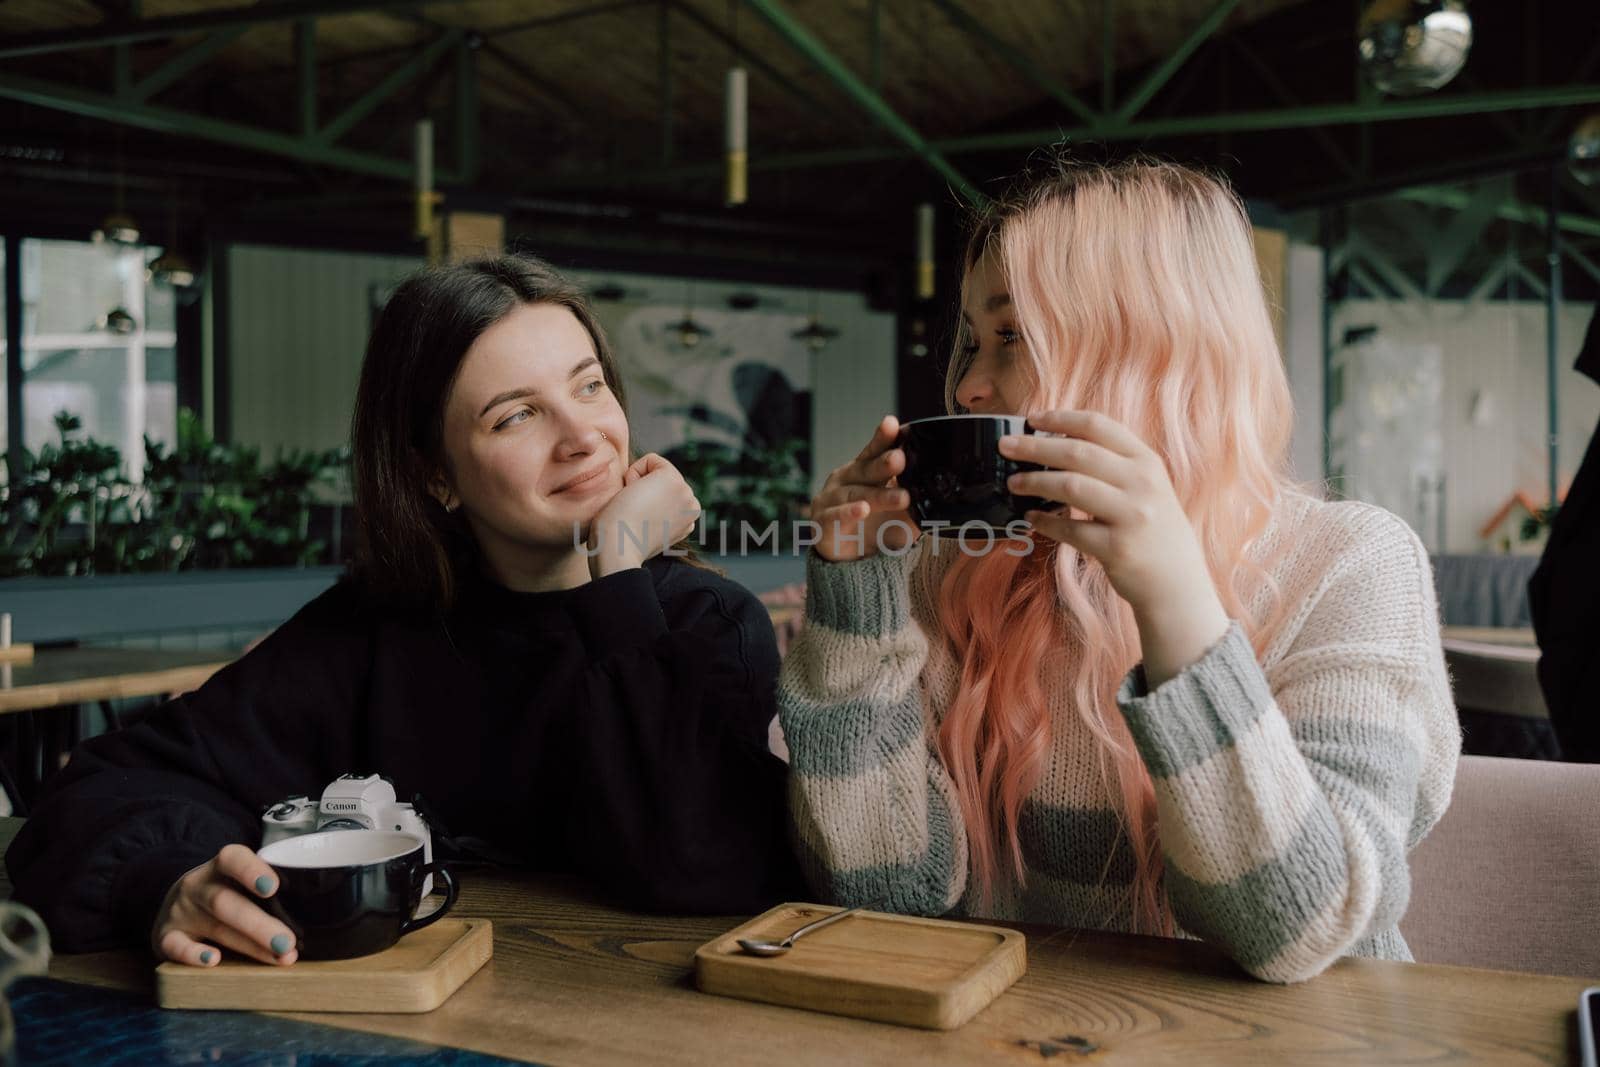 Interracial lesbian couple each other with shy smile, holding hands during lunch at restaurant. Happy redhead woman confessing love to her stylish Asian American girlfriend with pink hair hairstyle